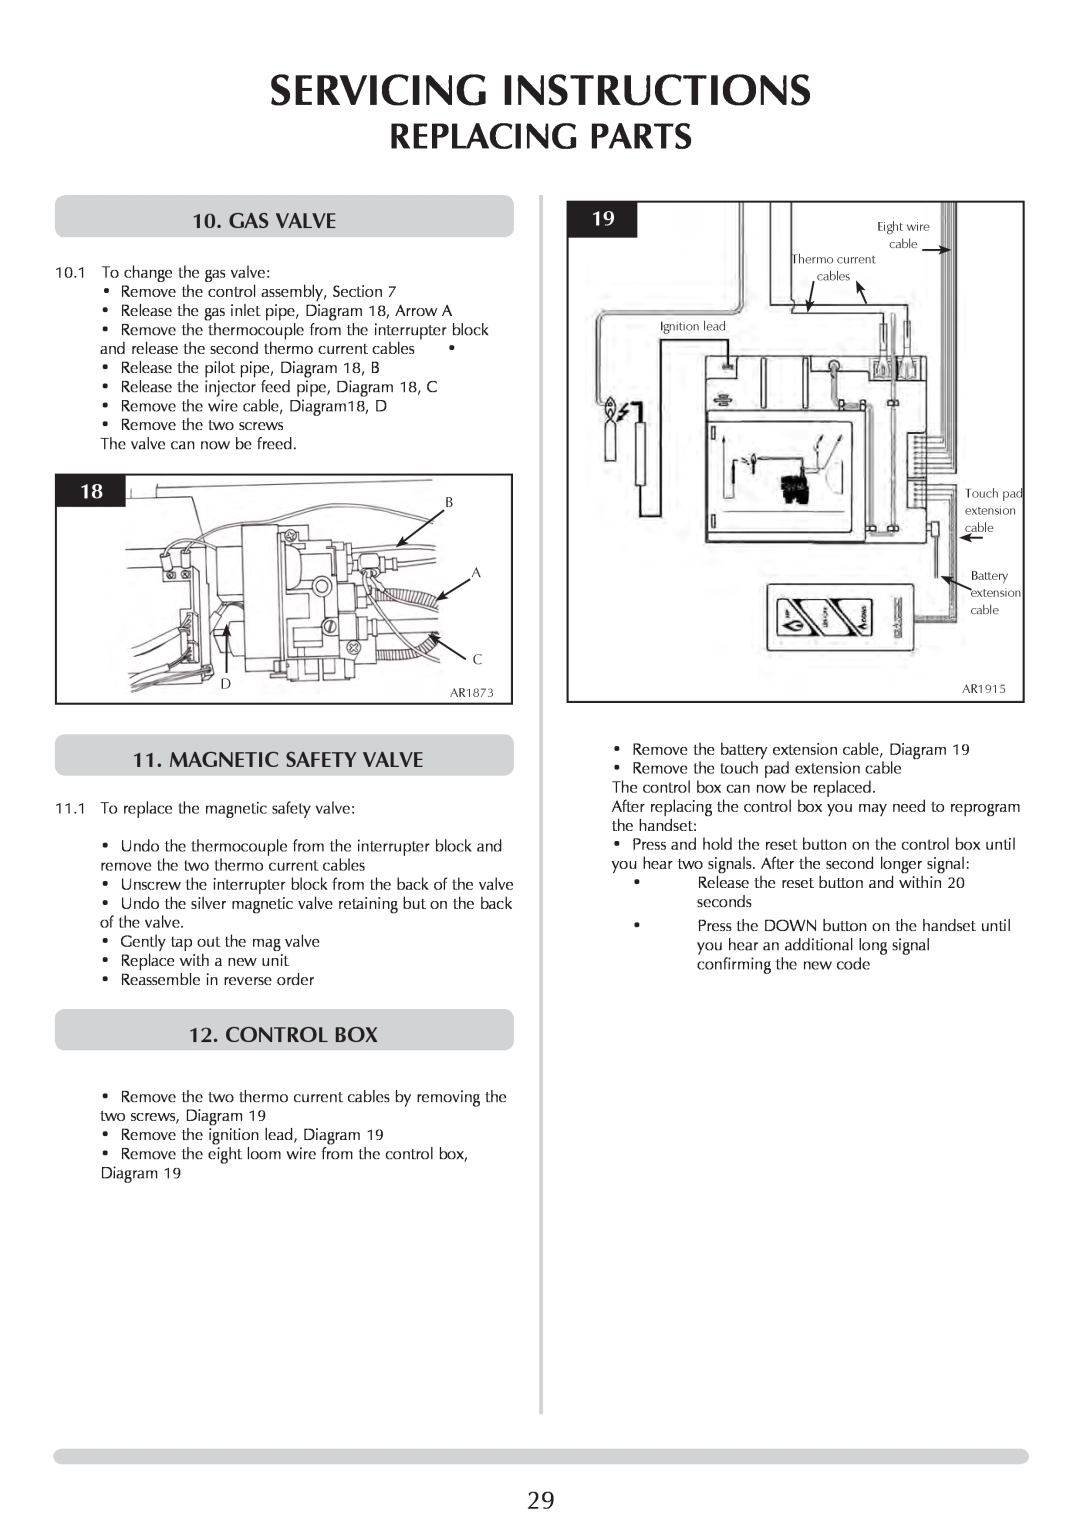 Stovax PR0919 manual Gas Valve, magnetic safety valve, Control Box, Servicing Instructions, Replacing Parts 